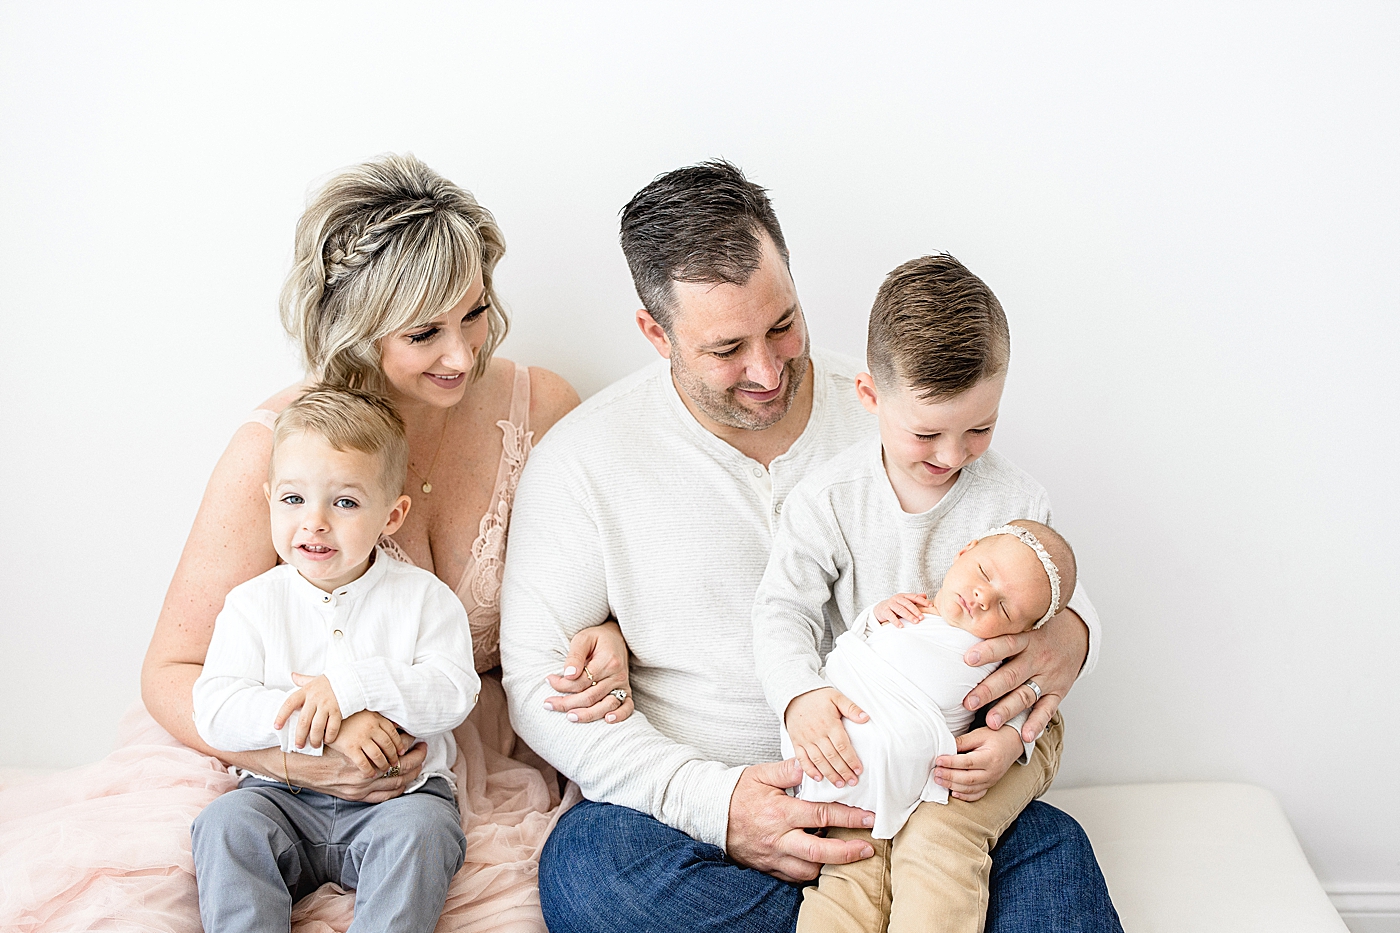 Family portrait with Mom, Dad, two boys and baby sister during baby girl's newborn session in the studio with Brittany Elise Photography.